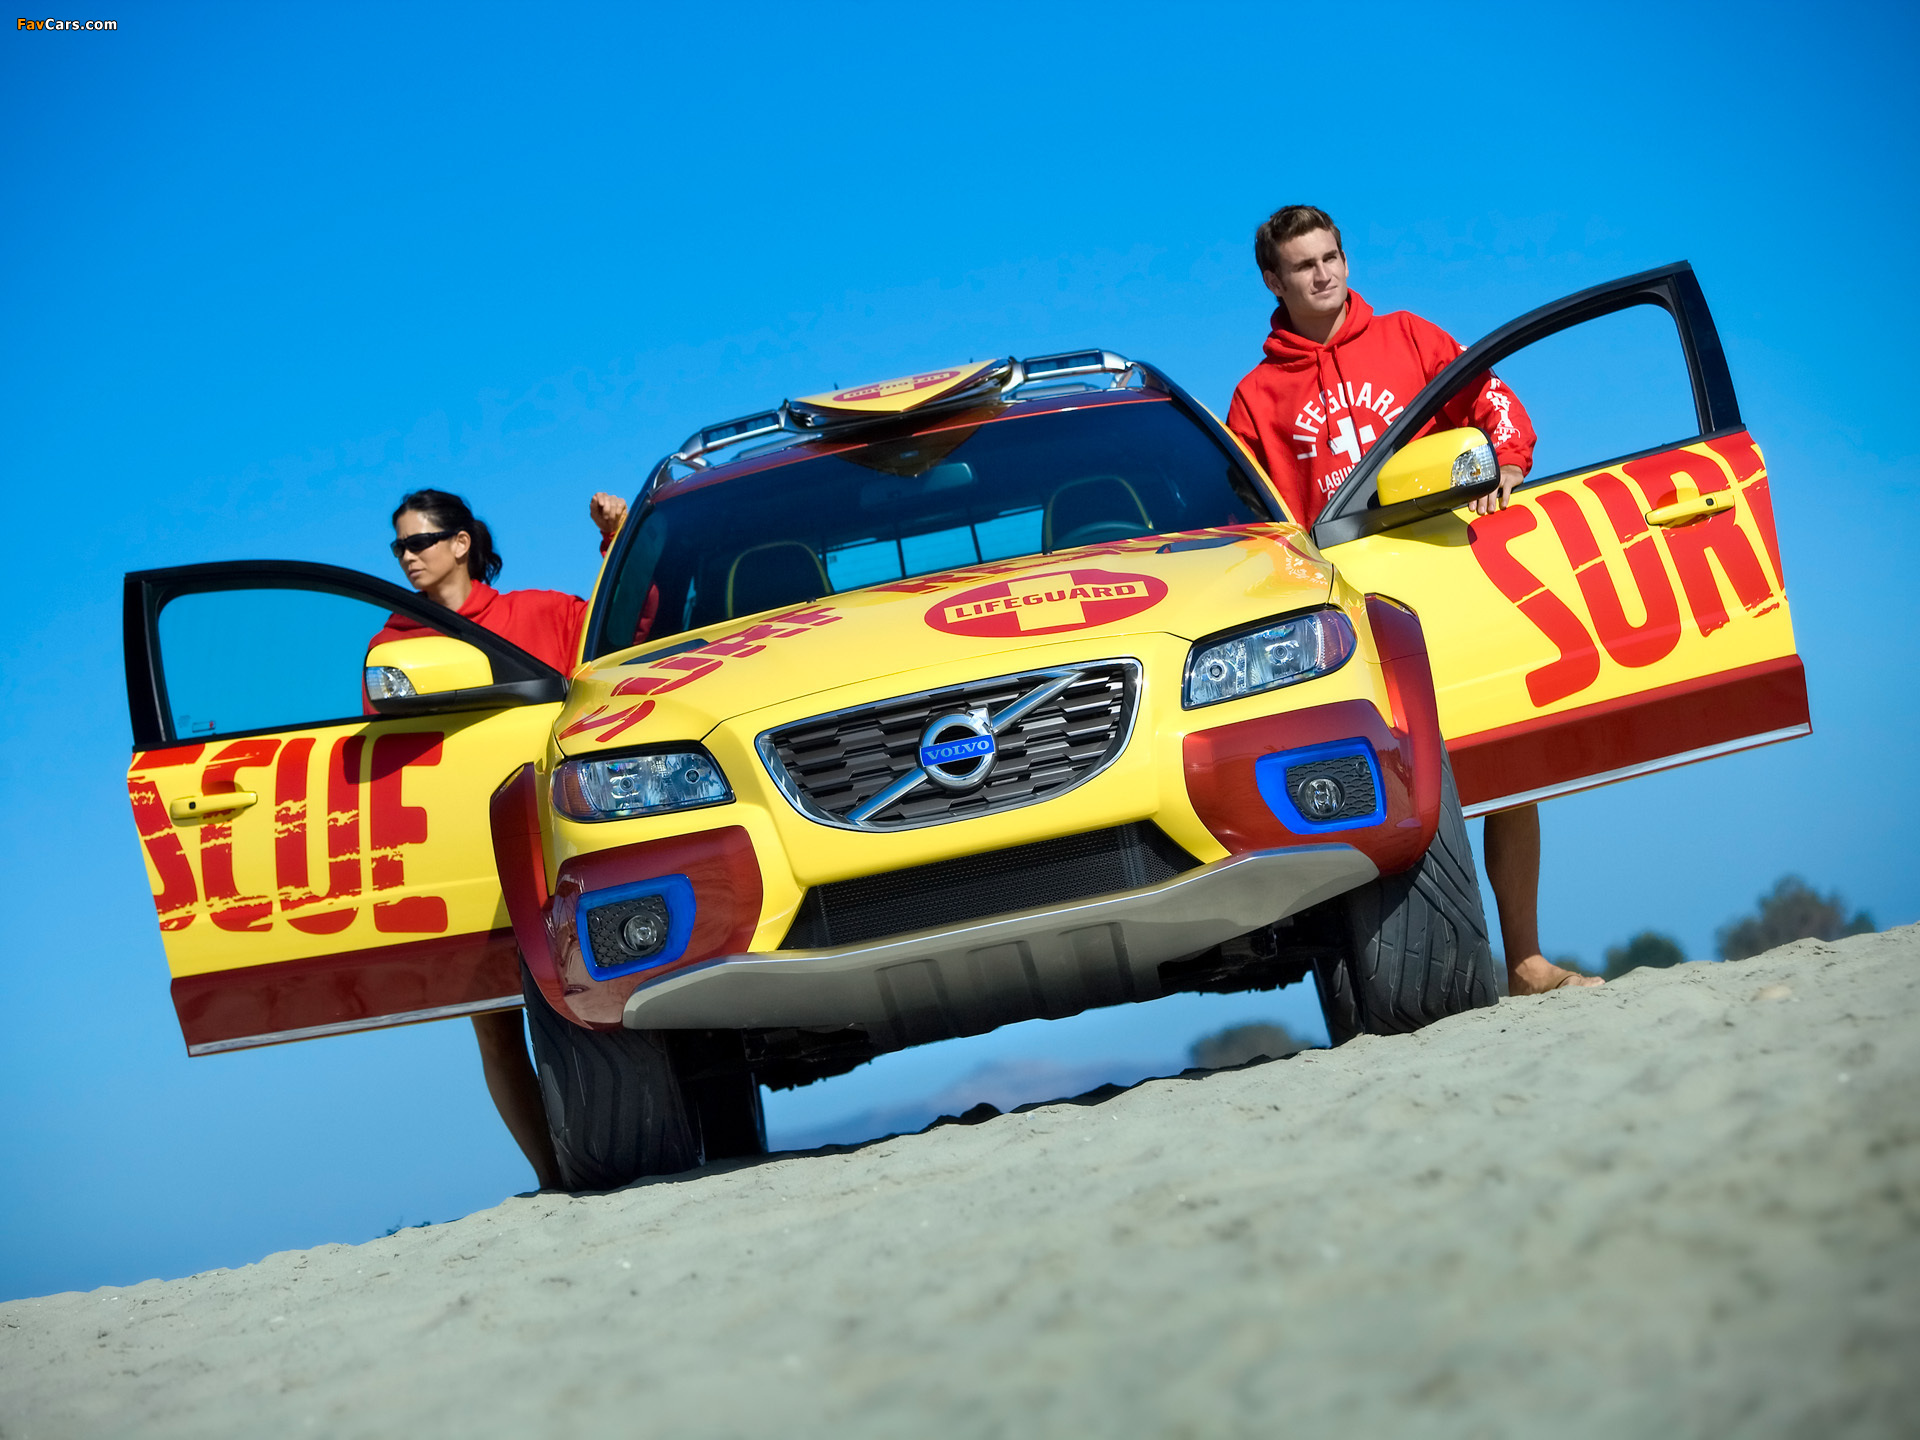 Volvo XC70 Surf Rescue Concept 2007 pictures (1920 x 1440)